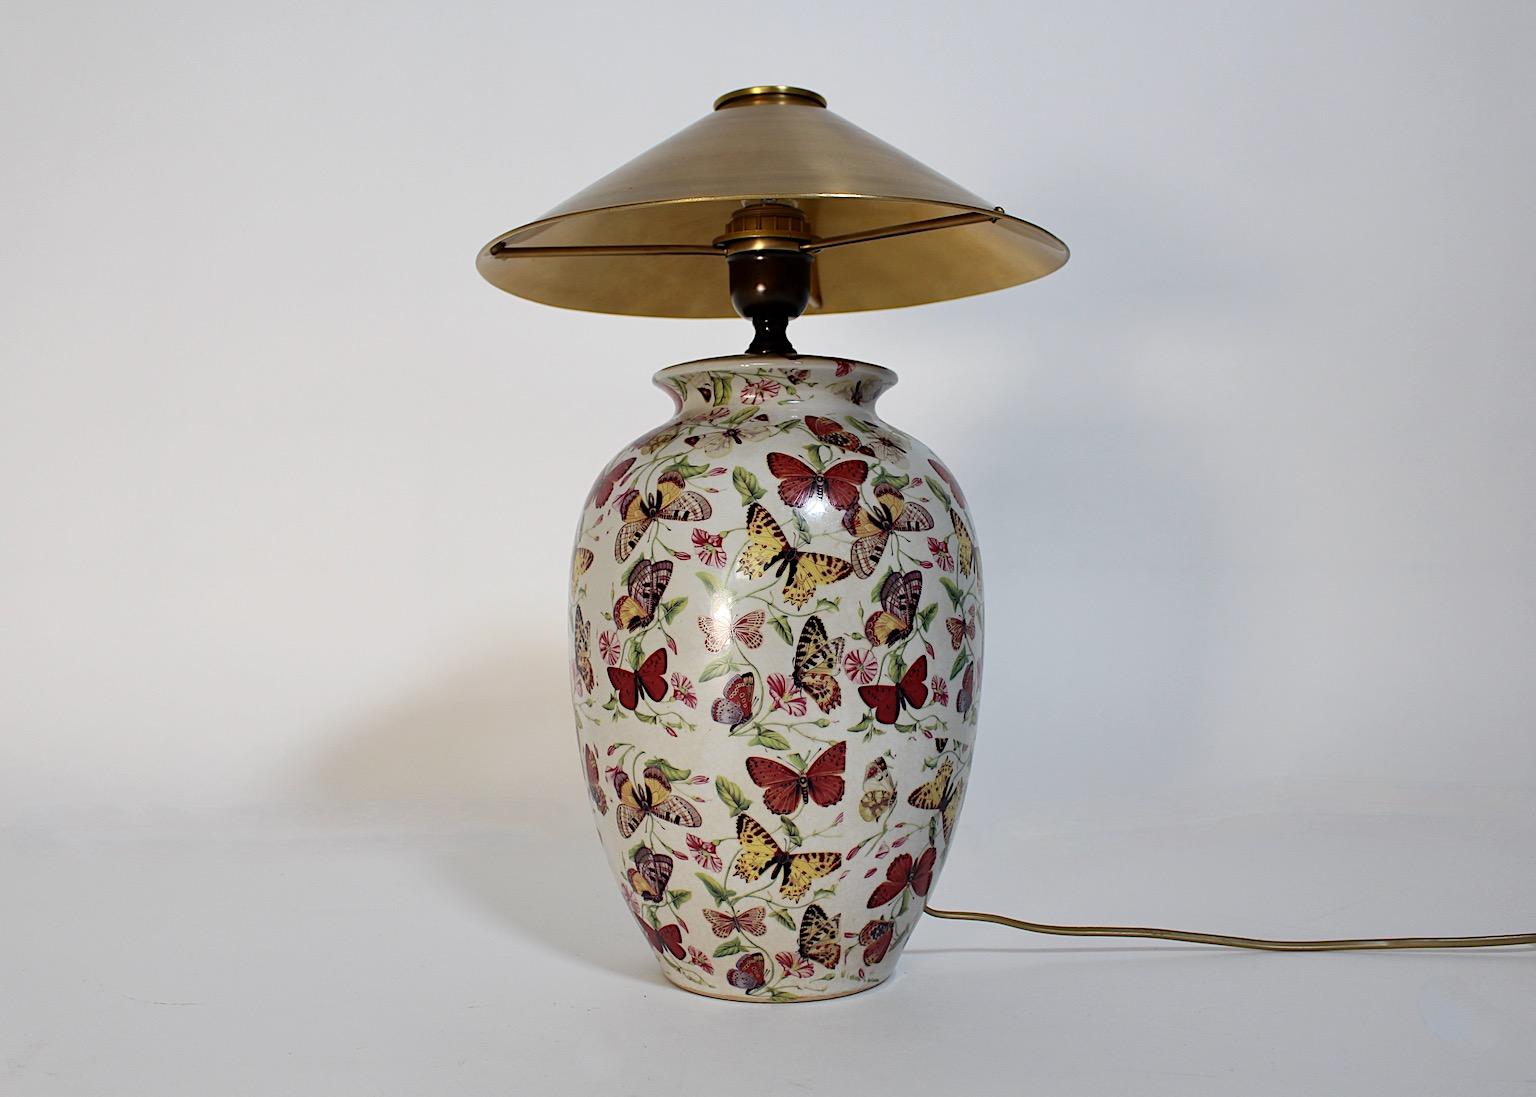 Modern Vintage Table Lamp Ceramic Brass Floral Fauna Butterfly Flowers 1980s In Good Condition For Sale In Vienna, AT